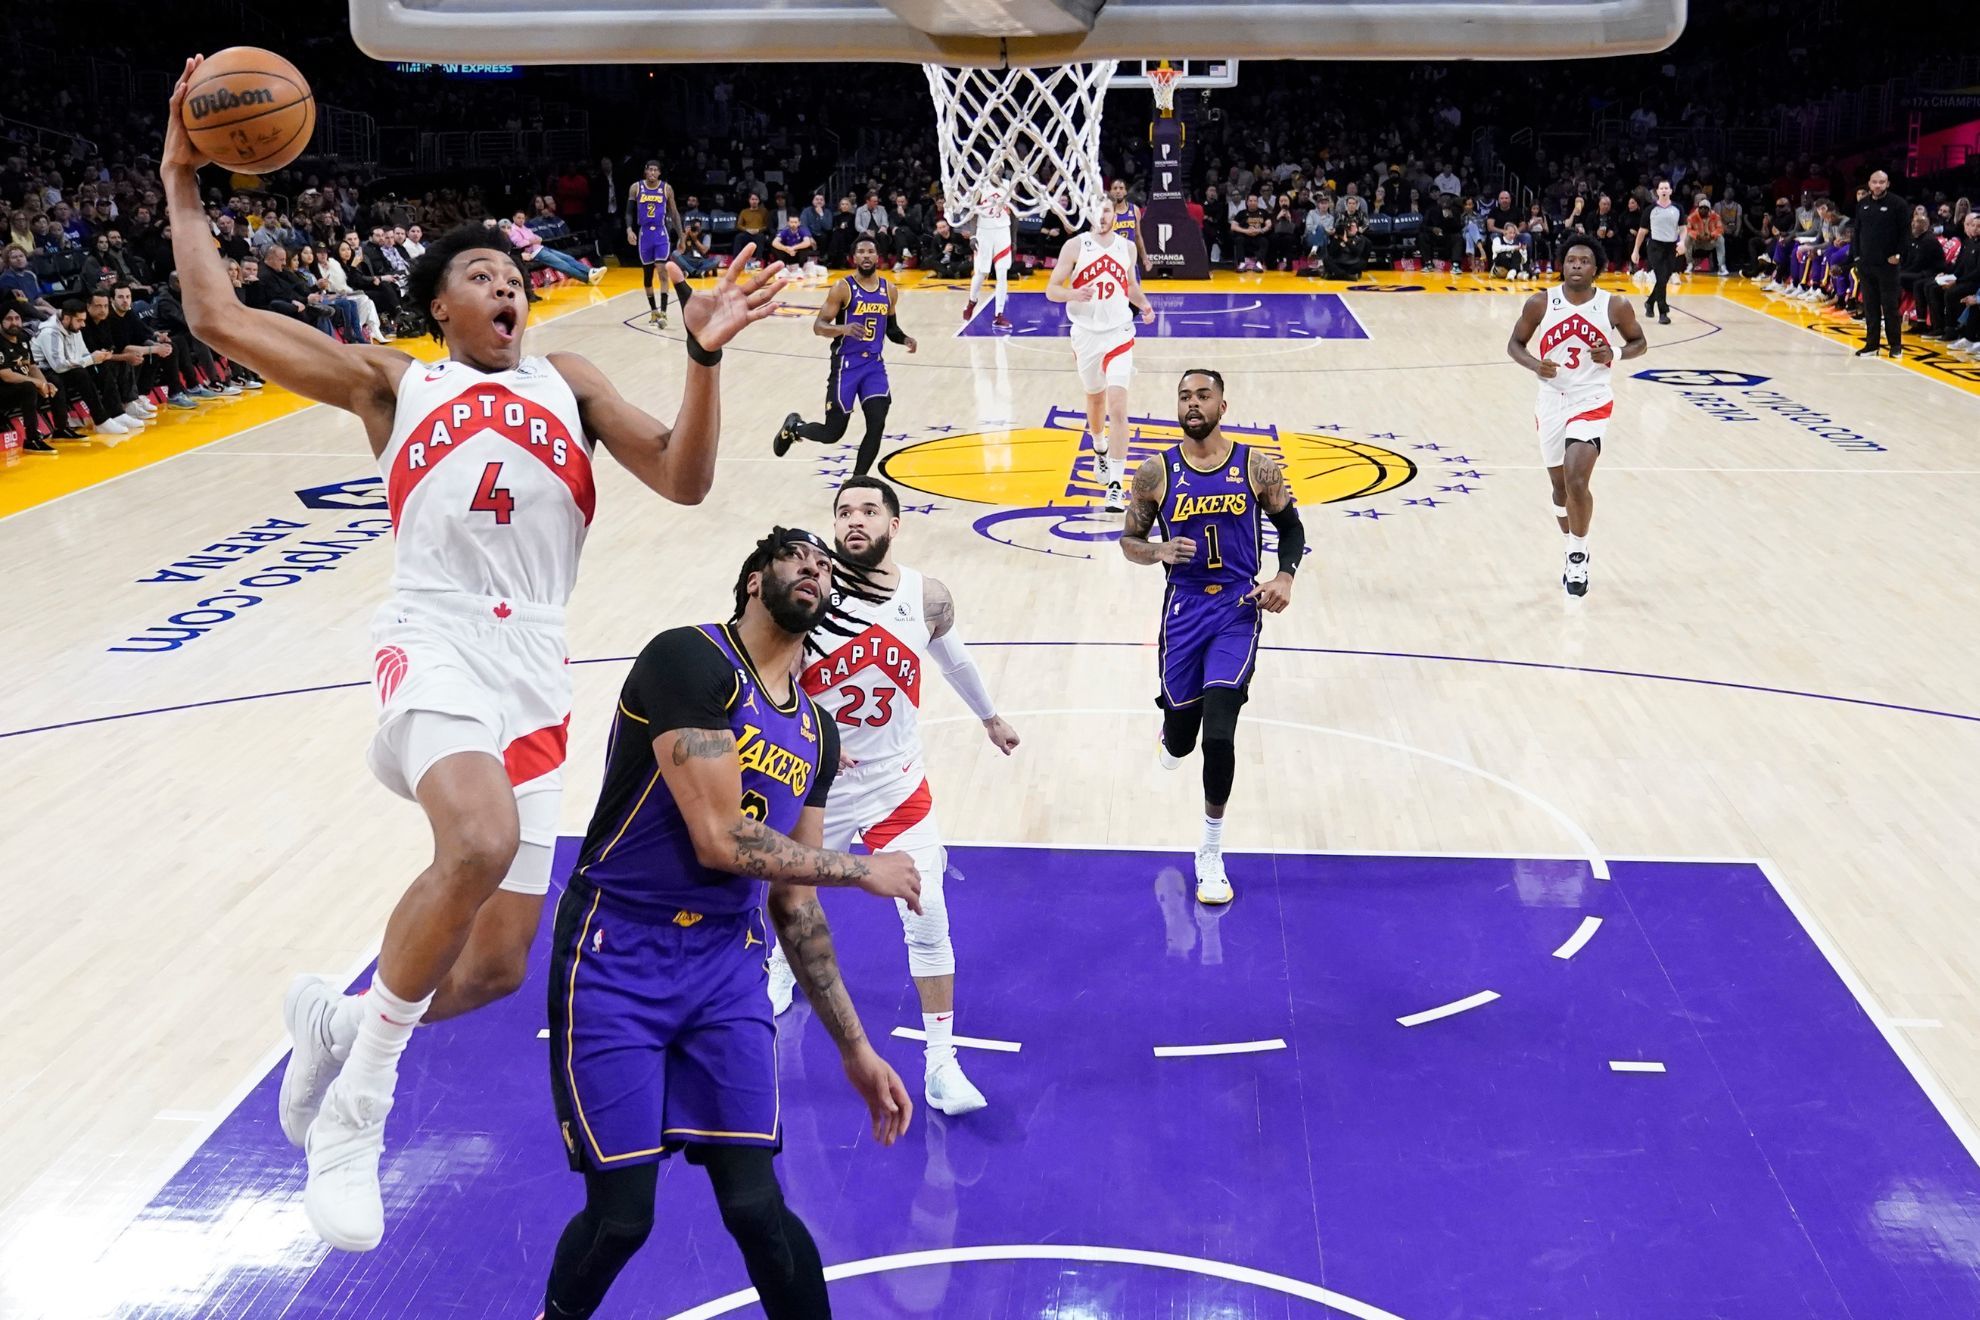 Lakers win home game over Raptors